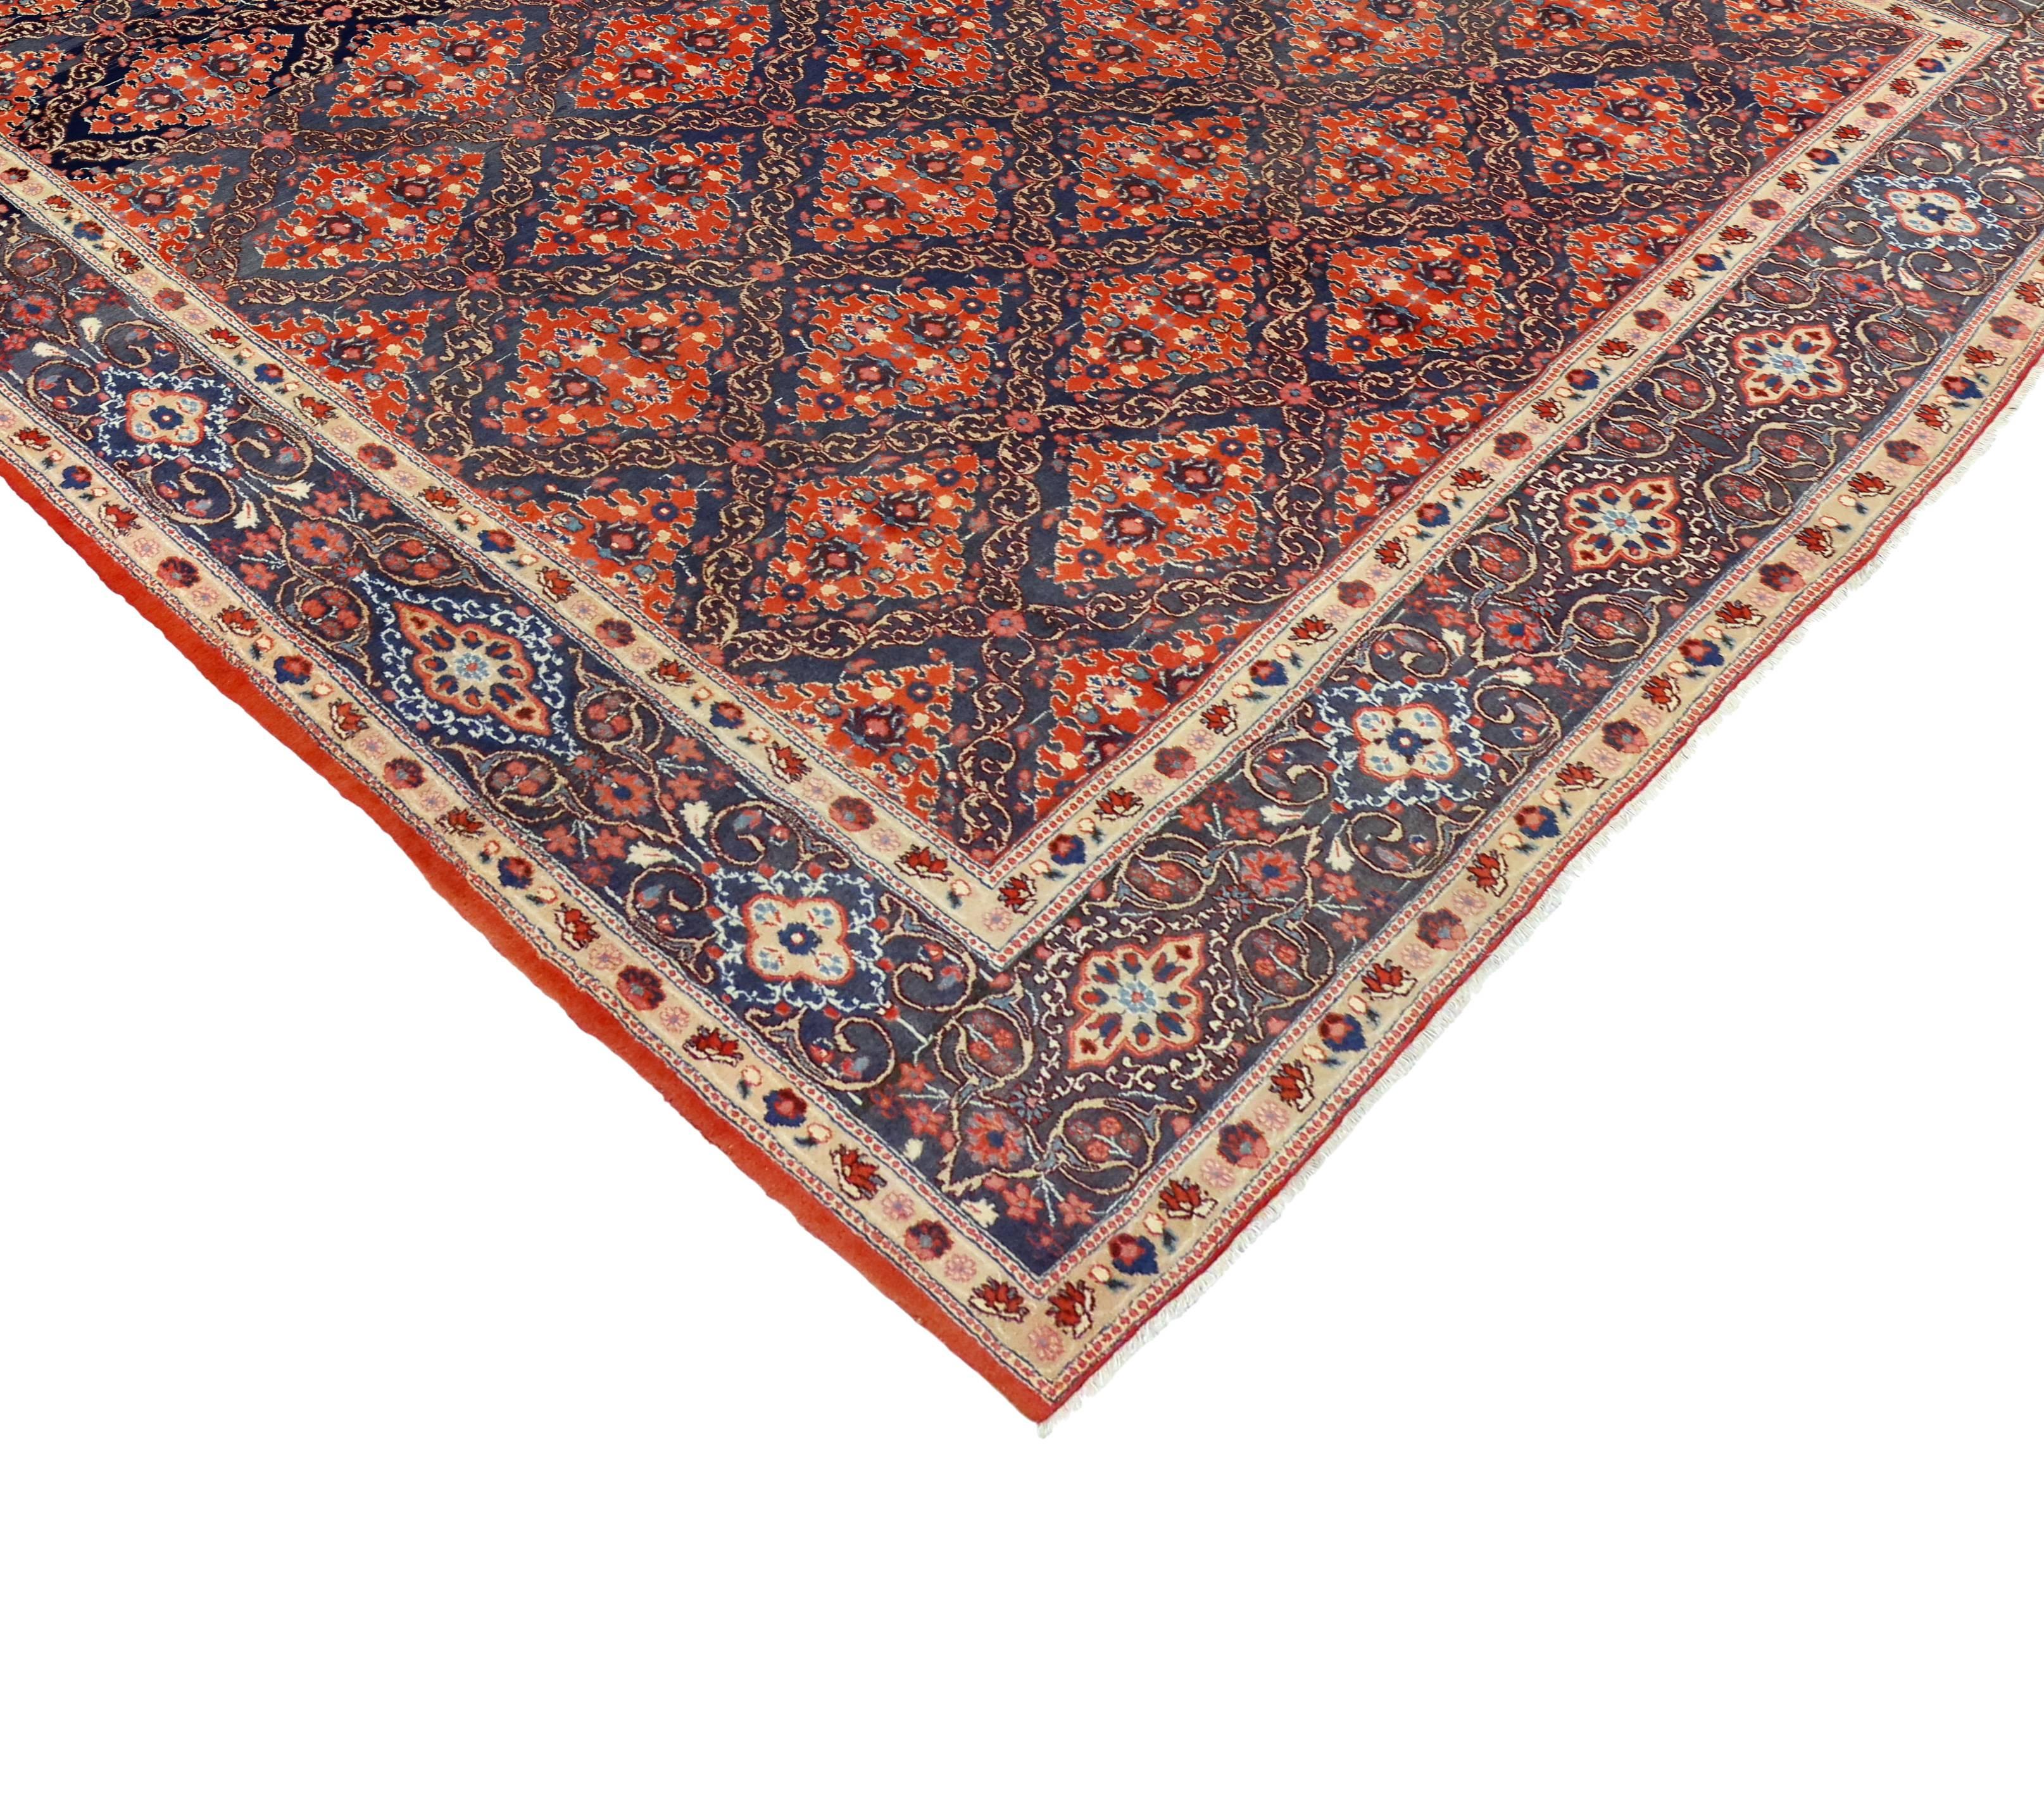 Vintage Persian Mashhad Rug with Modern Federal Style In Good Condition For Sale In Dallas, TX